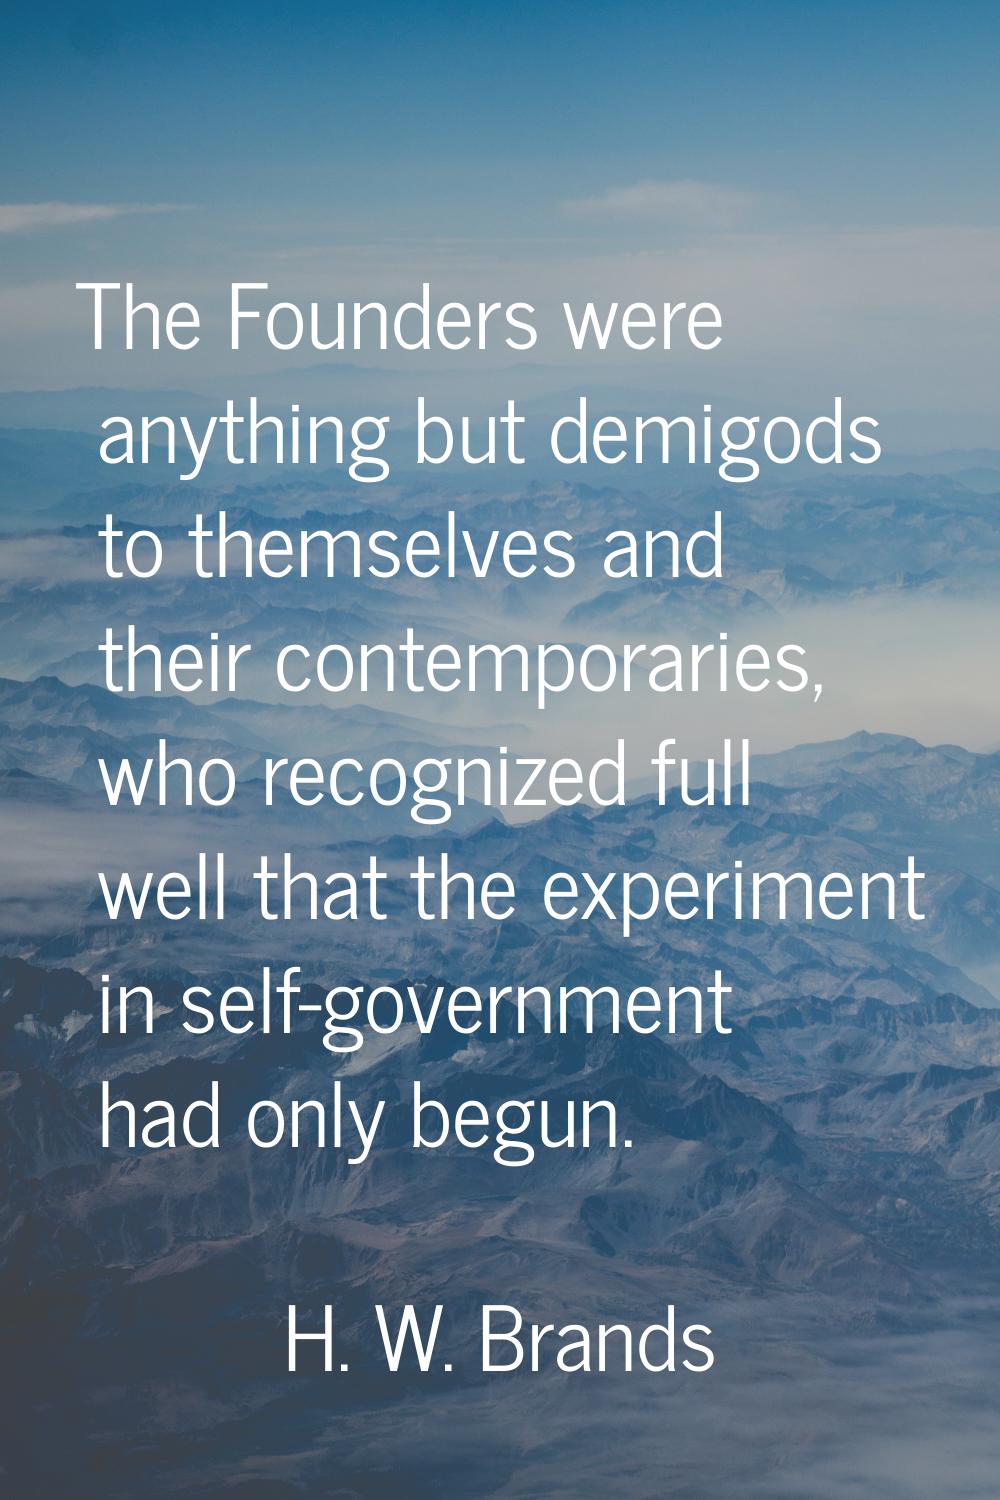 The Founders were anything but demigods to themselves and their contemporaries, who recognized full